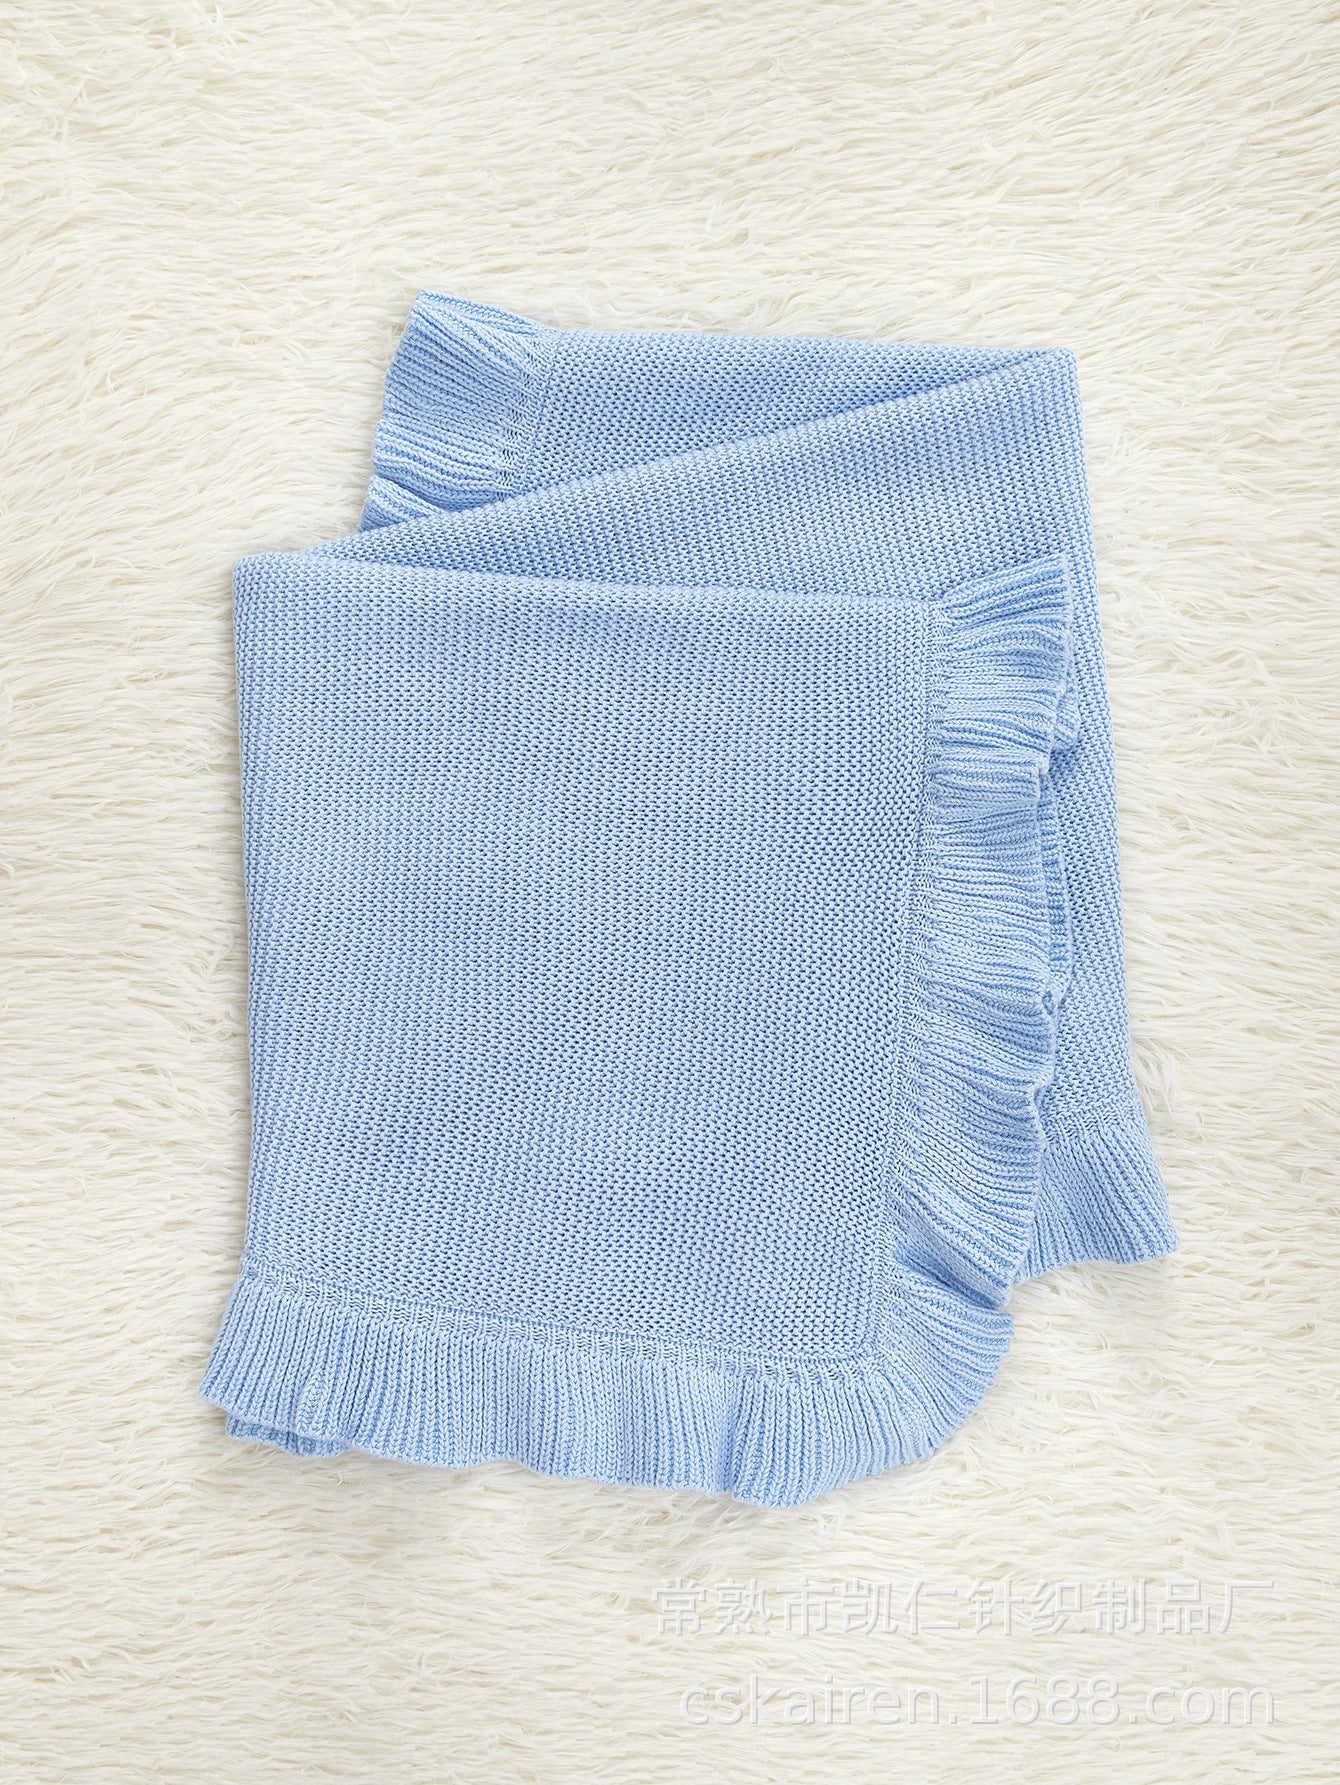 New Arrival Knitted Baby Blanket With Ruffle Trim Design: New Solid Color Pure Cotton Collection For All Seasons